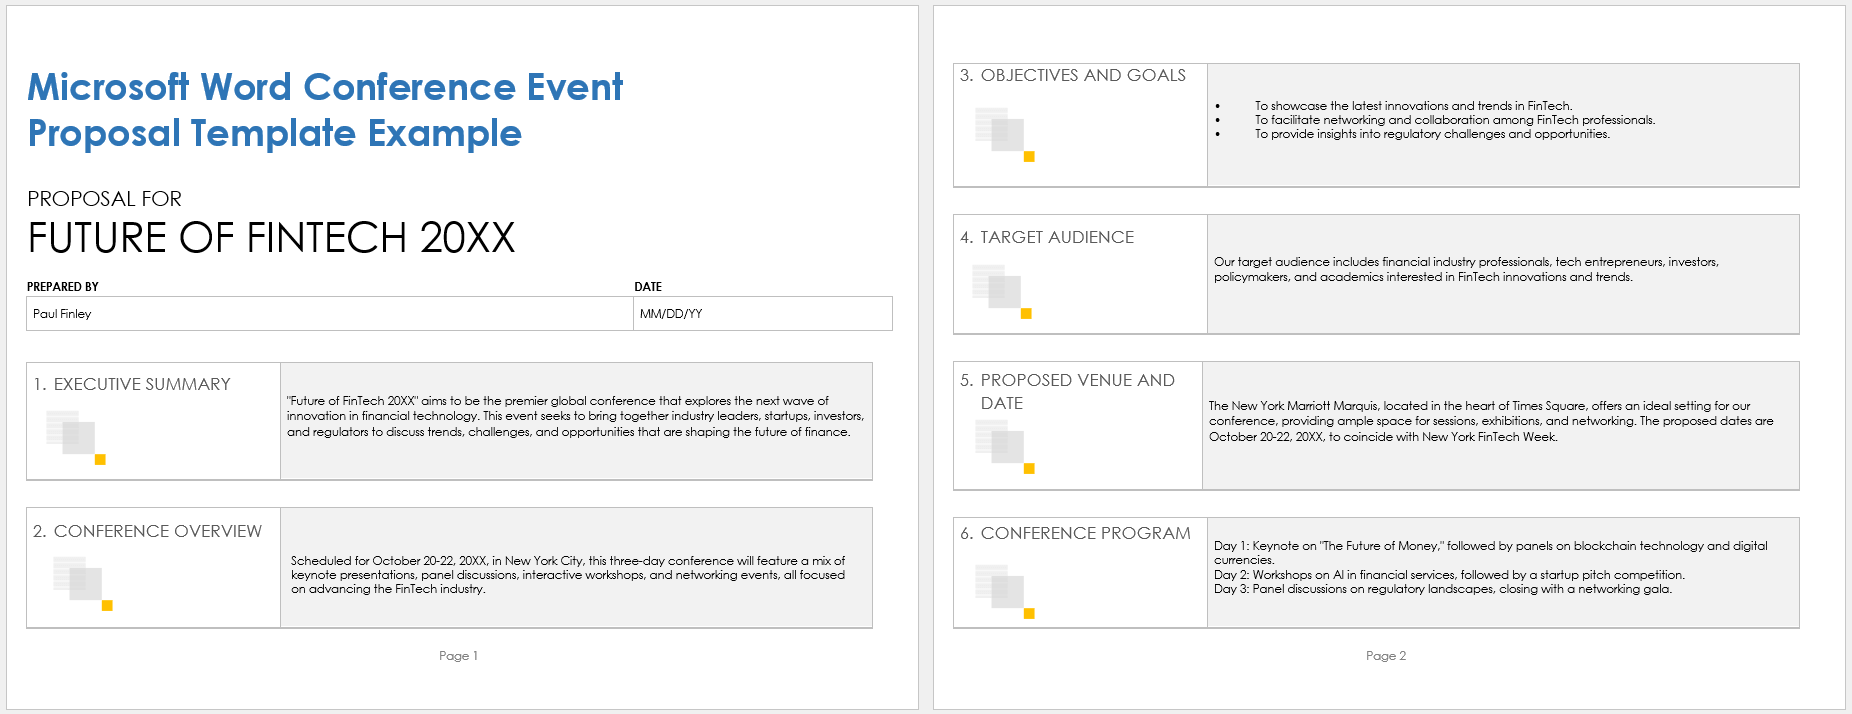 Microsoft Word Conference Event Proposal Template Example